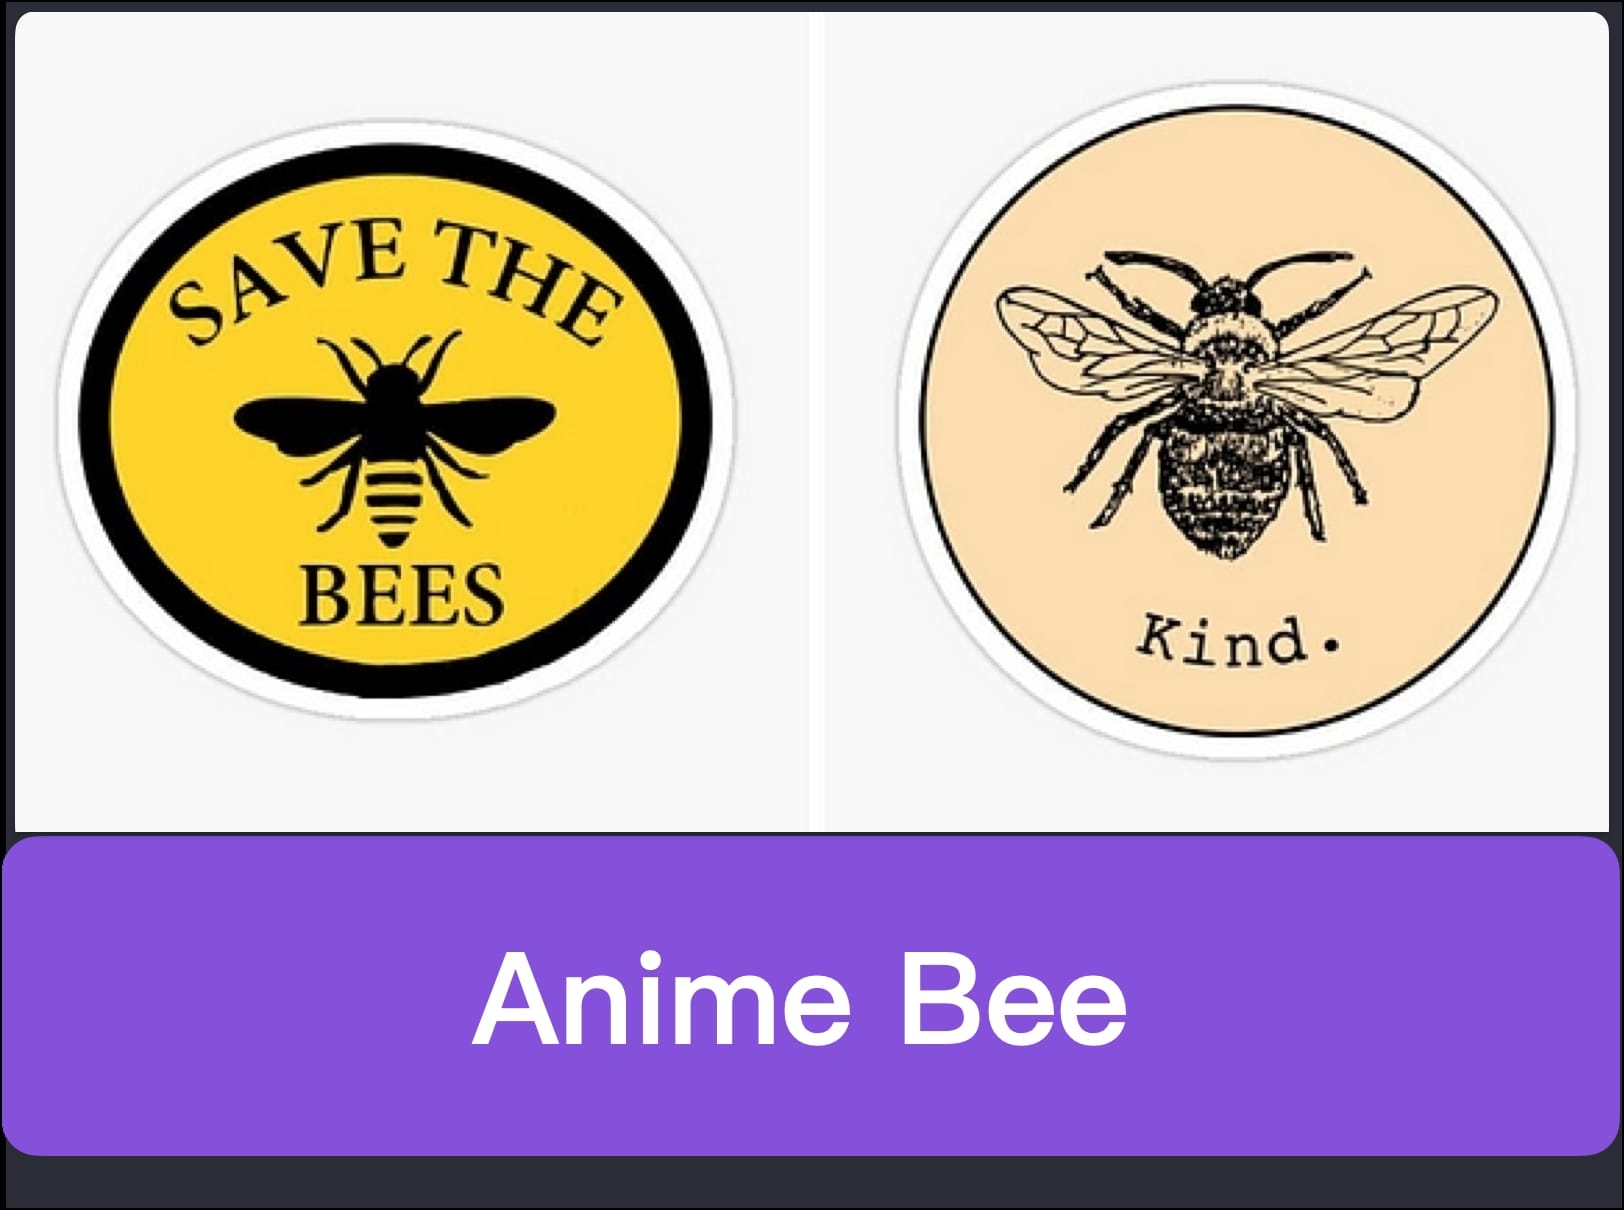 Cute Anime Bee Stickers for Your Laptop